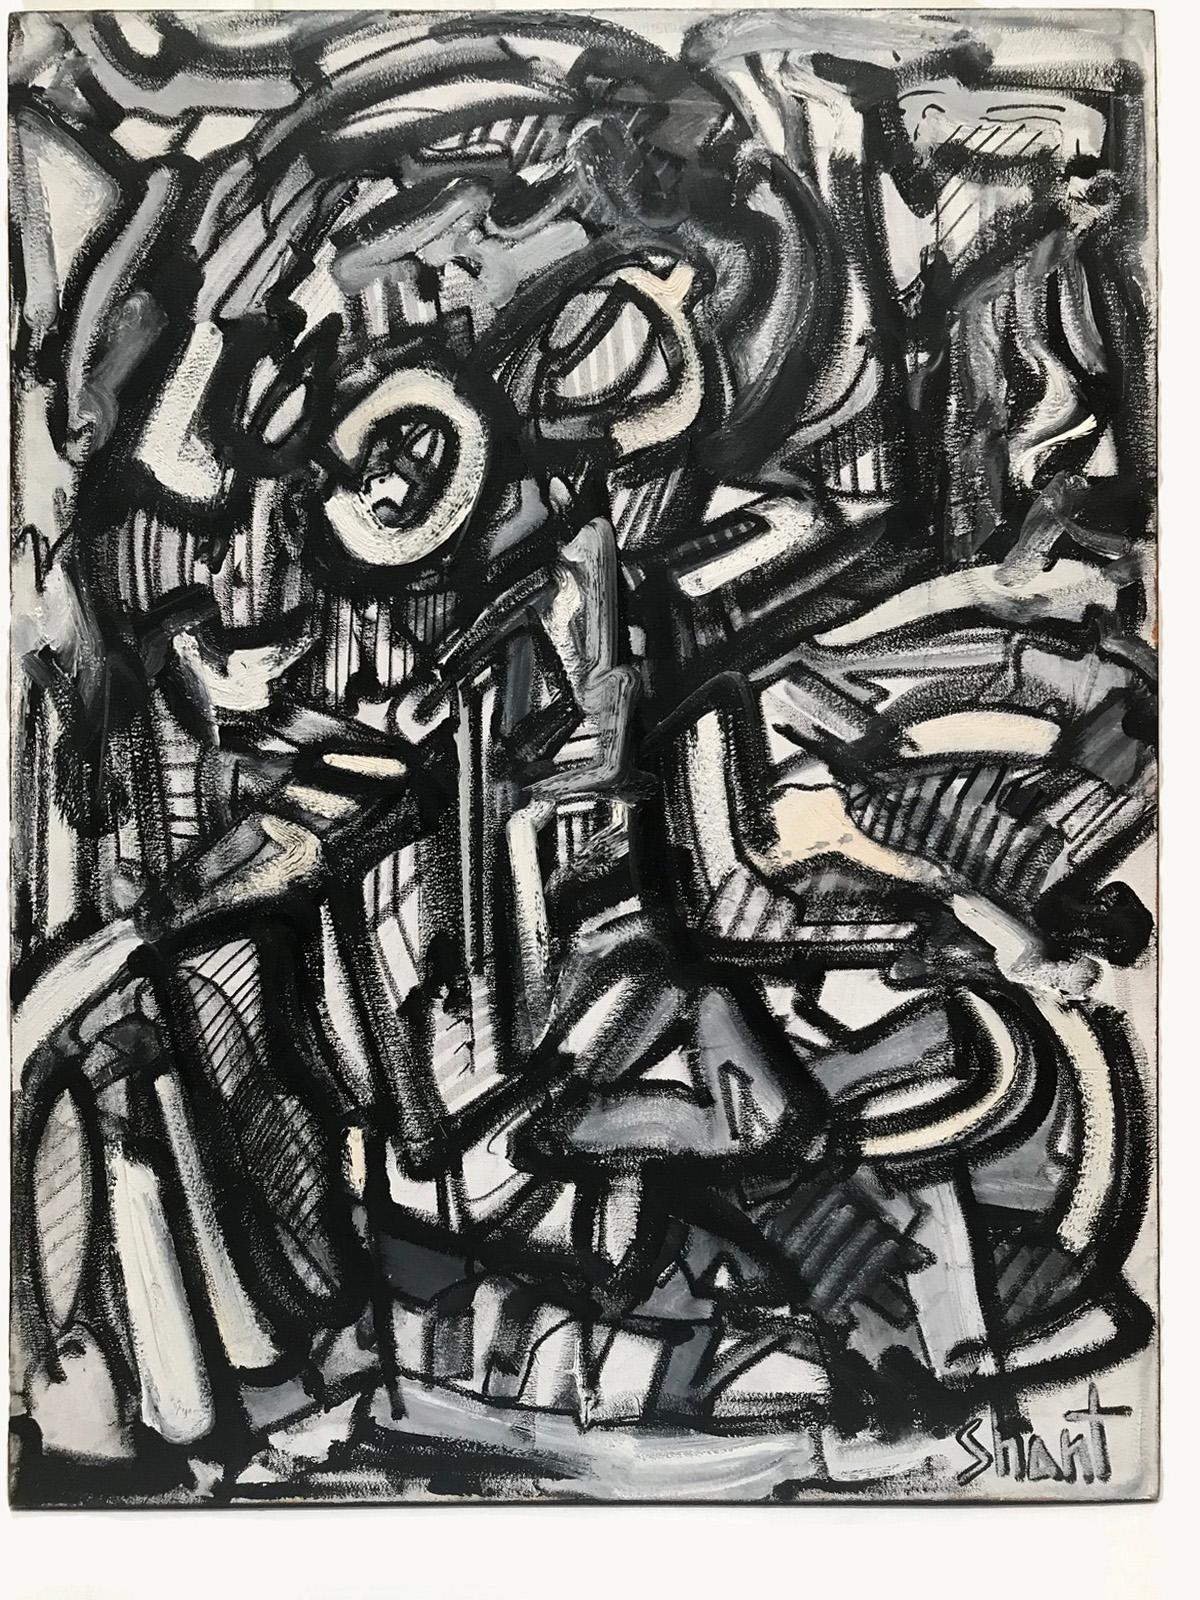 In this abstract expressionist painting by Shant, the tension between black and white creates an immediate, palpable sense of unease, which could recall the chaos and turmoil often associated with Lebanon's complex history. Indeed, Shank was born in